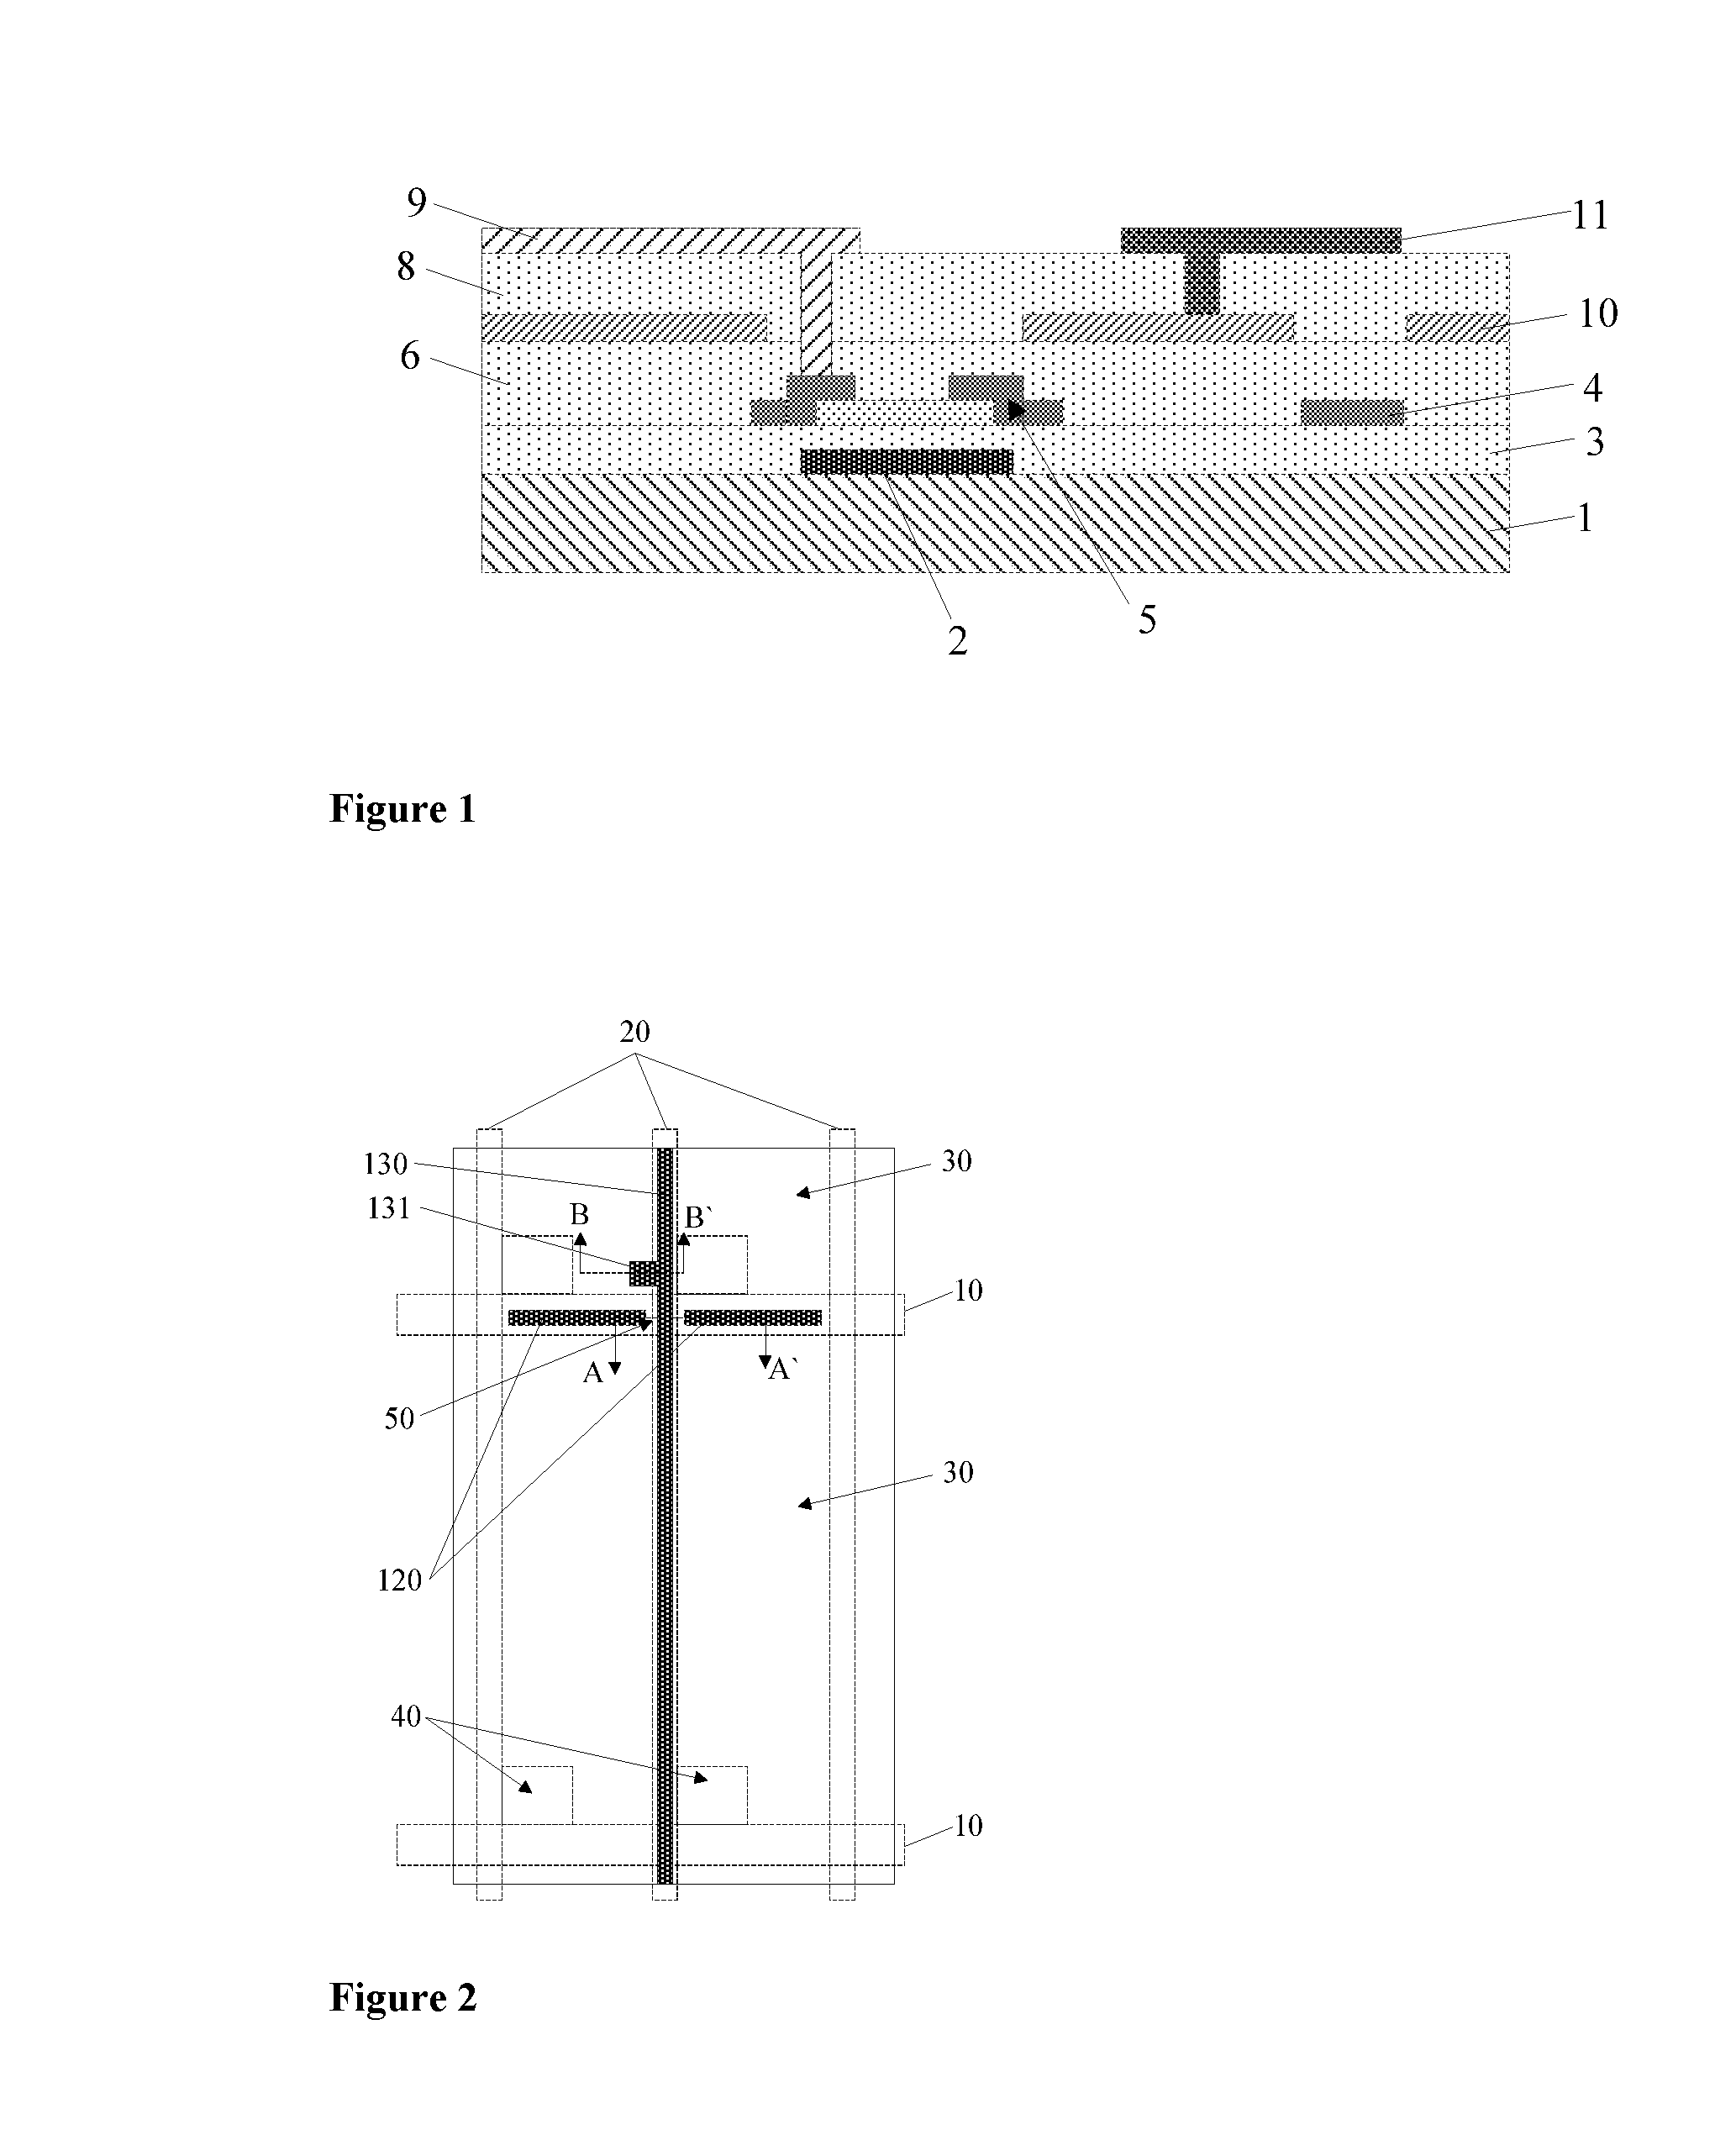 Touch display panel structure, method for forming the same, and touch display device